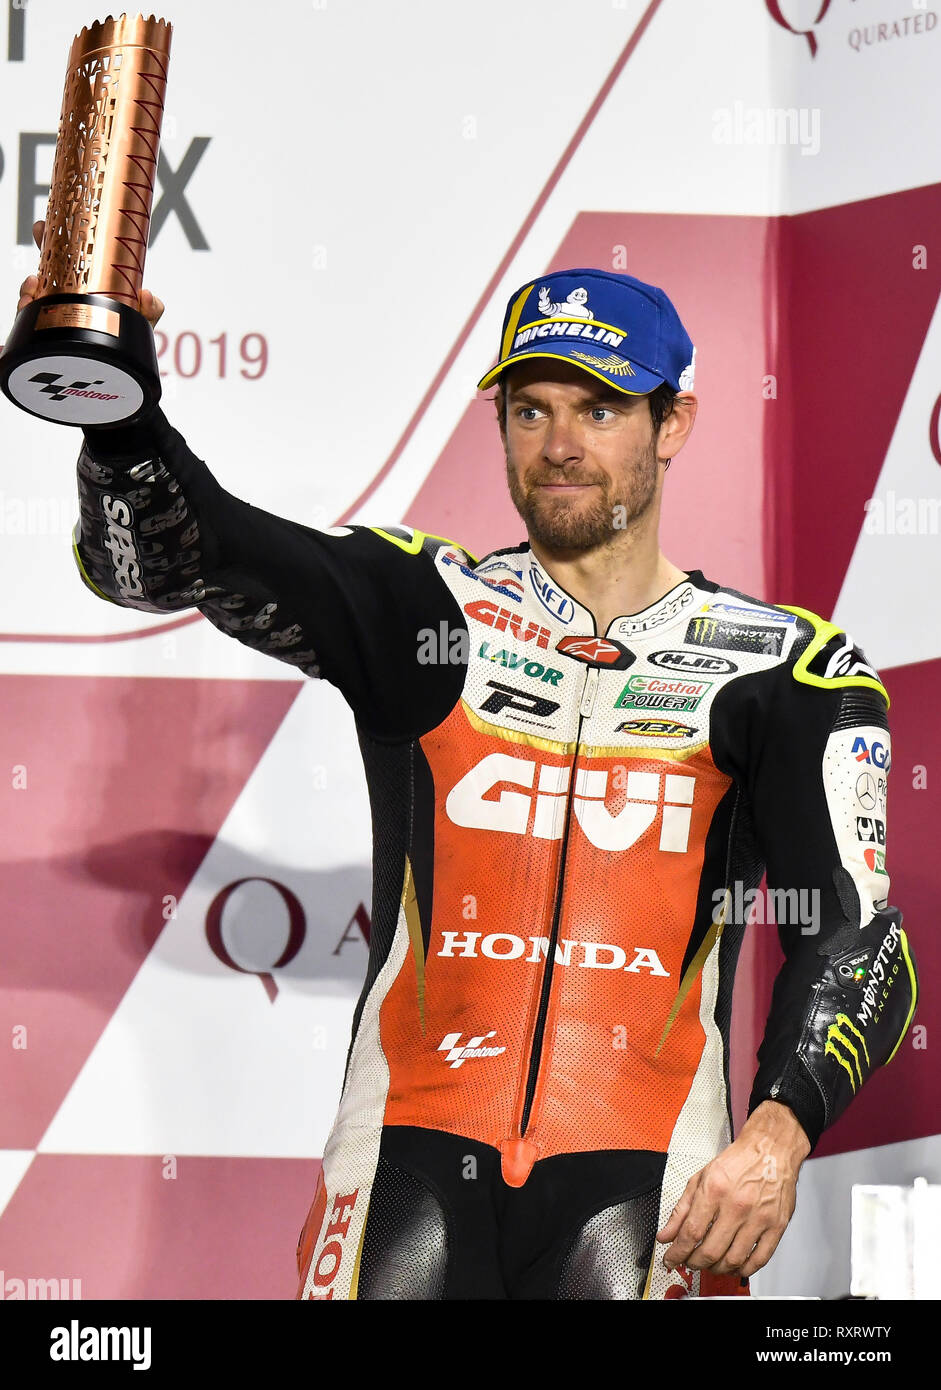 Doha, Qatar. 10th Mar, 2019. LCR Honda team's British rider Cal Crutchlow celebrates during the awarding ceremony for the MotoGP race of the 2019 MotoGP Grand Prix of Qatar in Losail Circuit of Doha, capital of Qatar, on March 10, 2019. Cal Crutchlow took the third place with 42 minutes and 37.222 seconds. Credit: Nikku/Xinhua/Alamy Live News Stock Photo